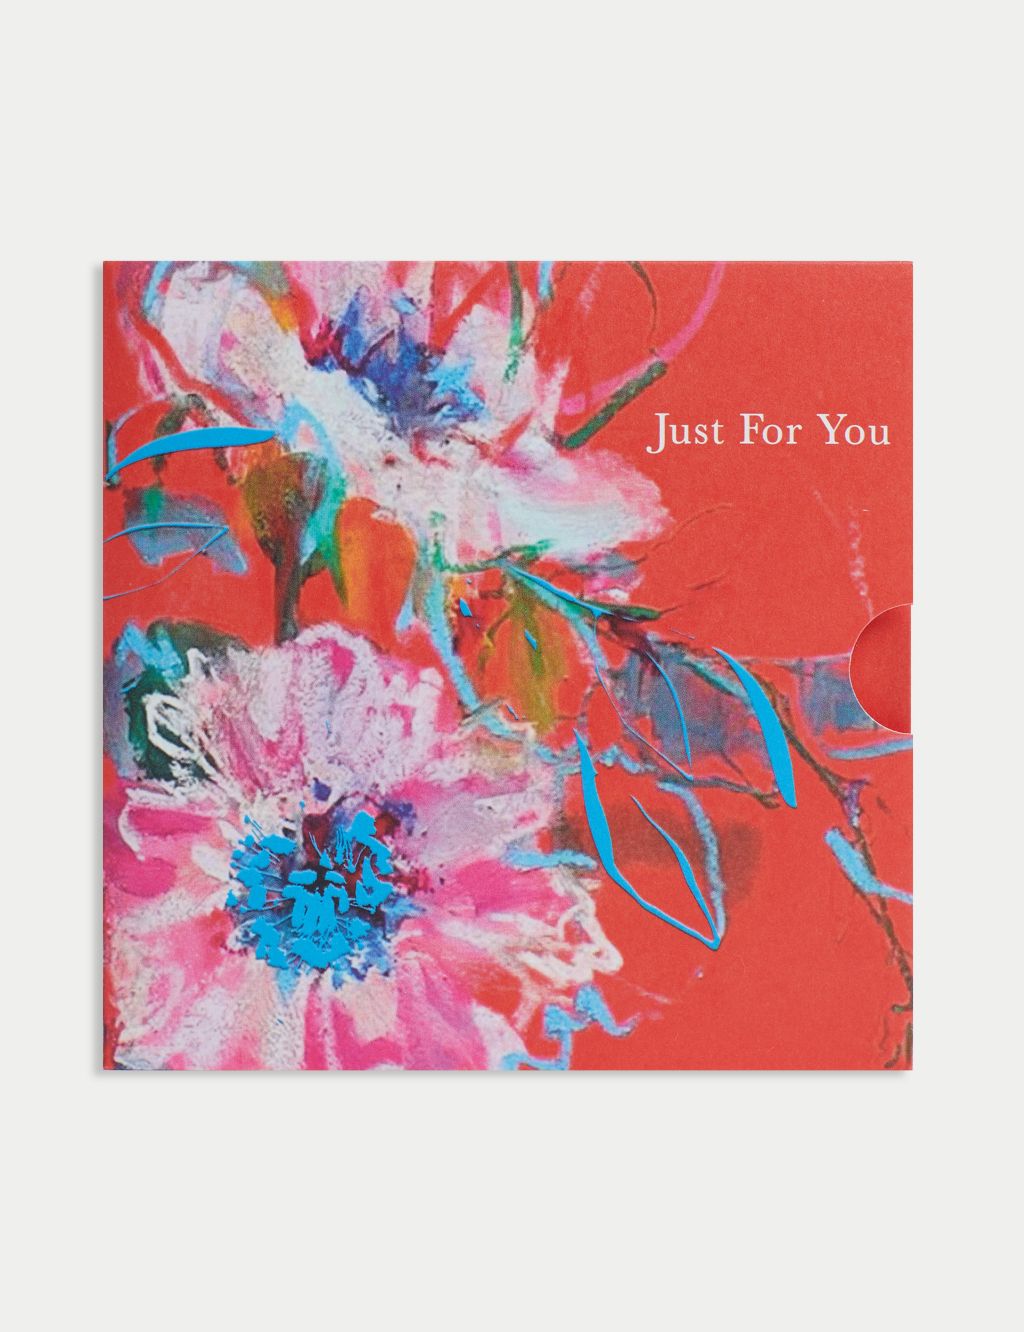 Coral Floral Gift Card